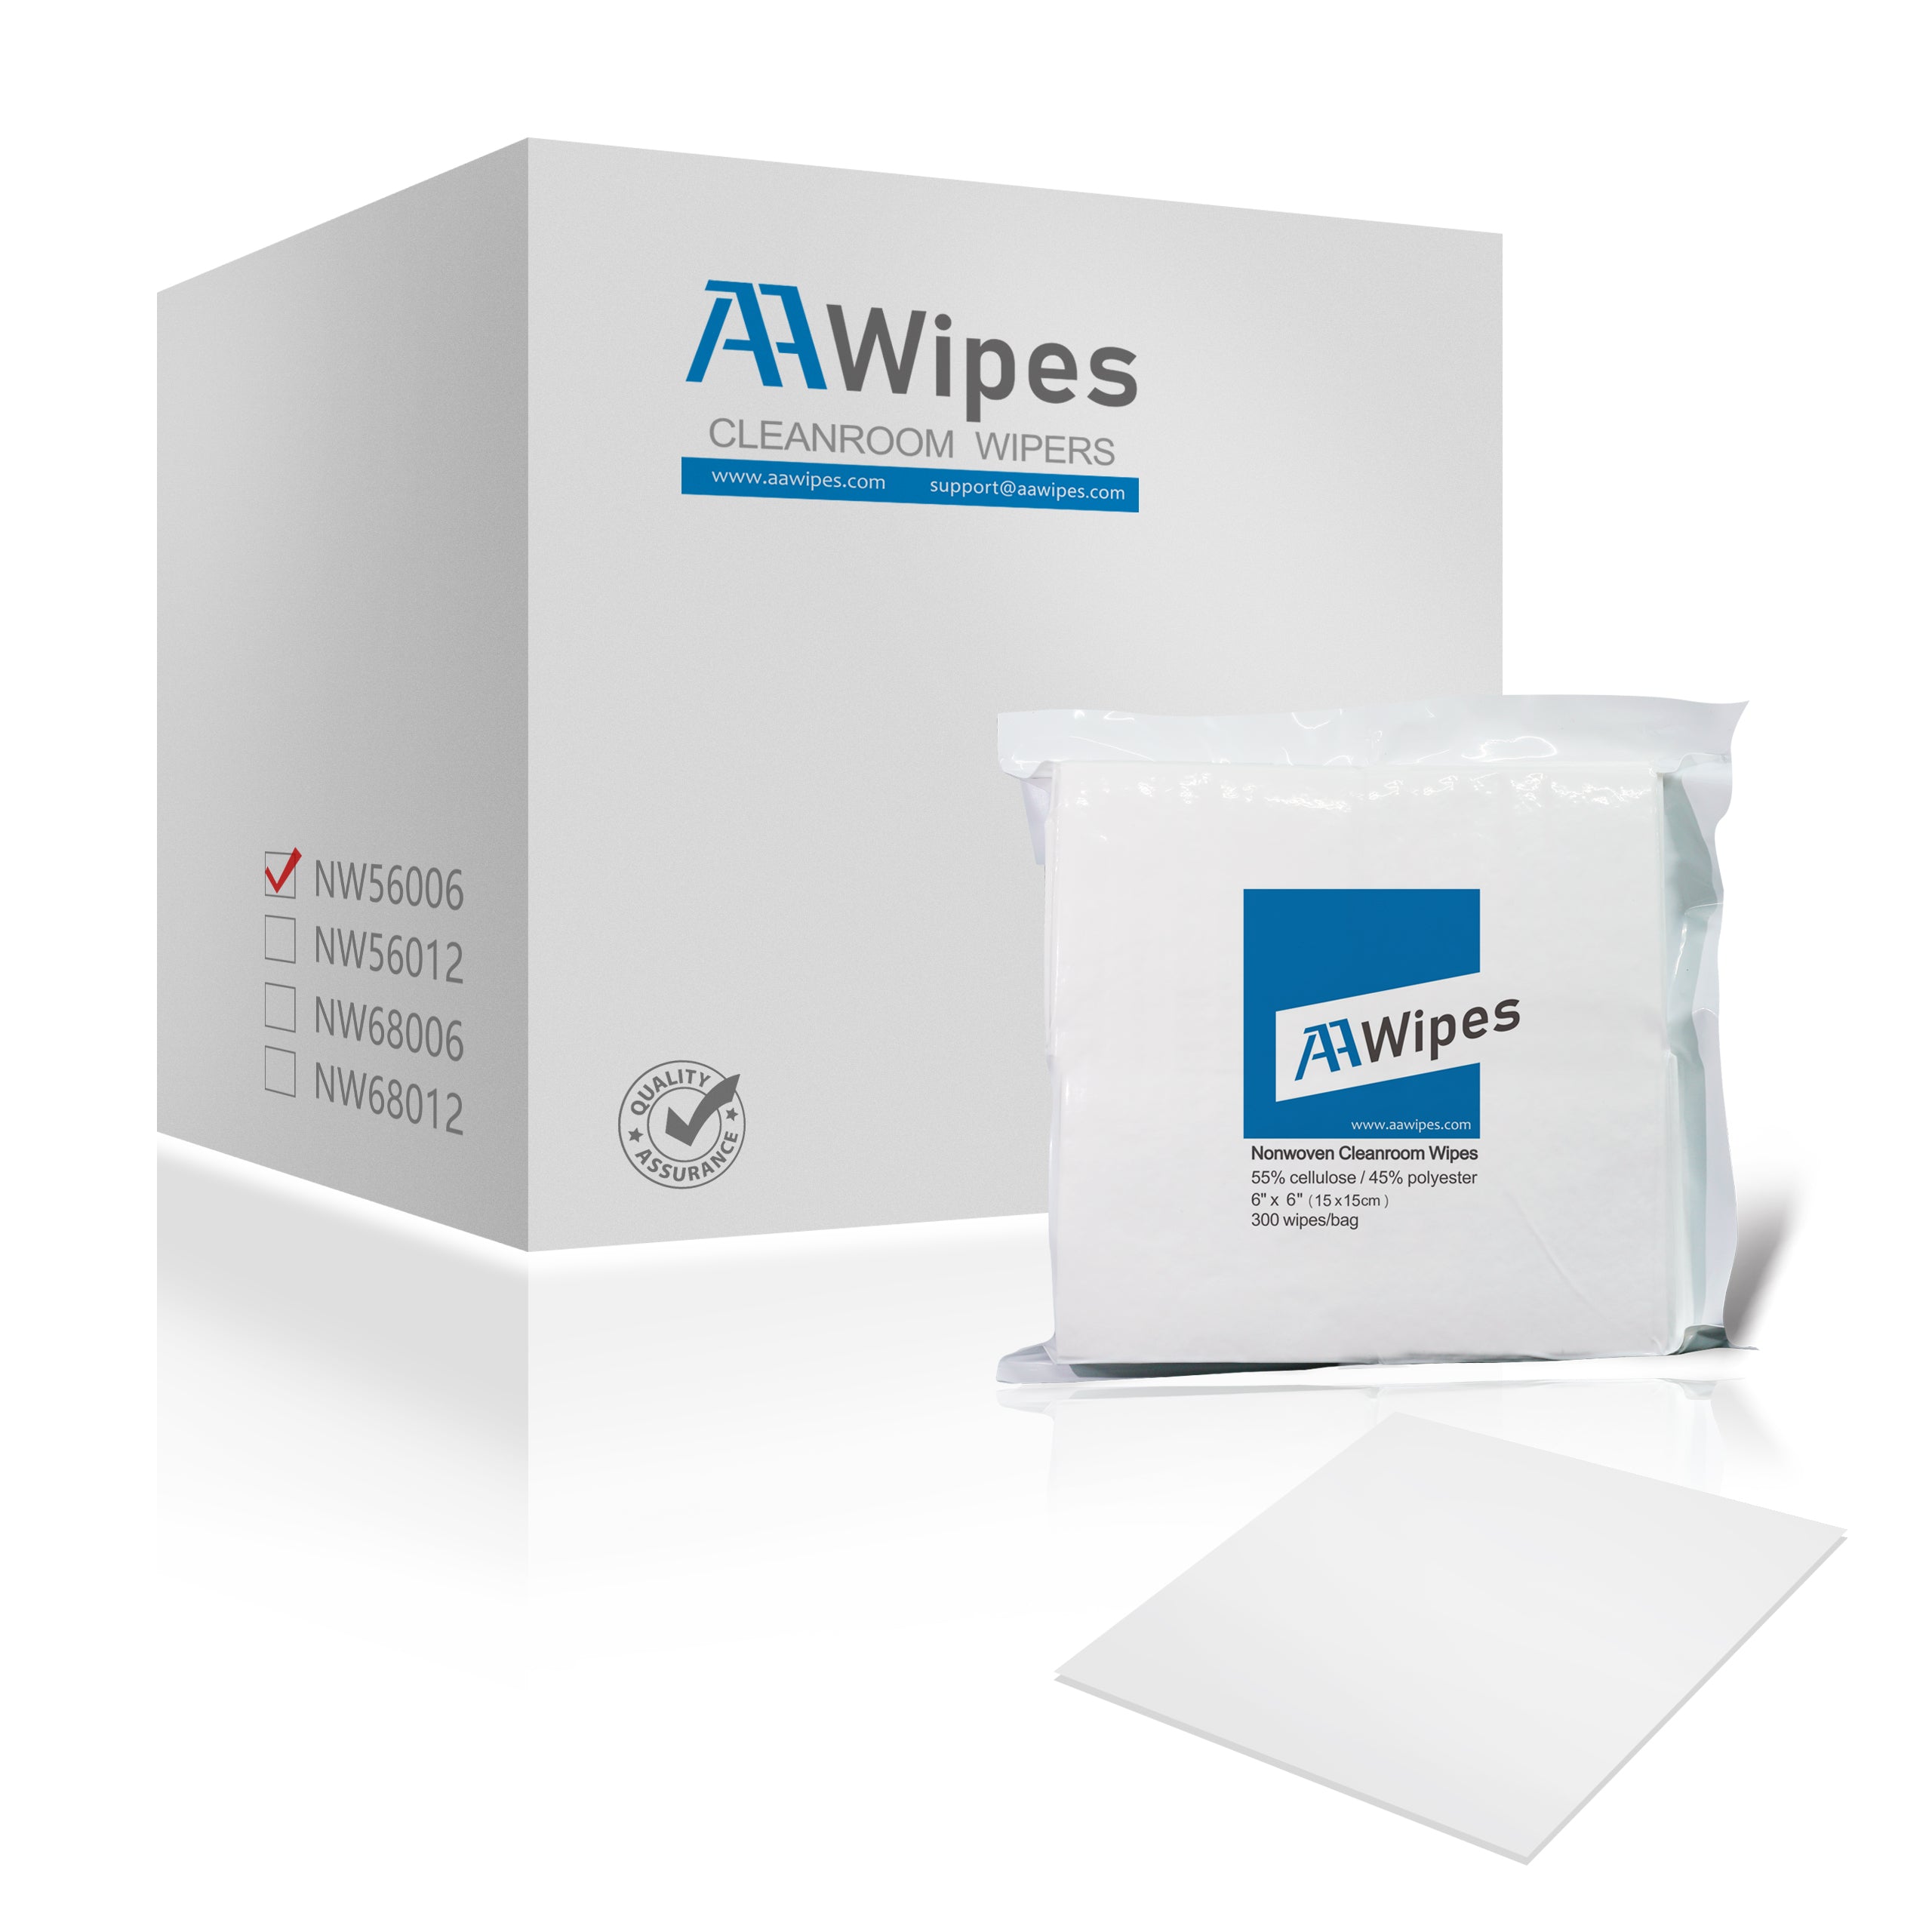 AAwipes feature excellent wet and dry strength, superior oil absorbency, abrasion and chemical resistance, making them ideal for all-purpose wiping. They are economical, reusable, and maintain high quality.